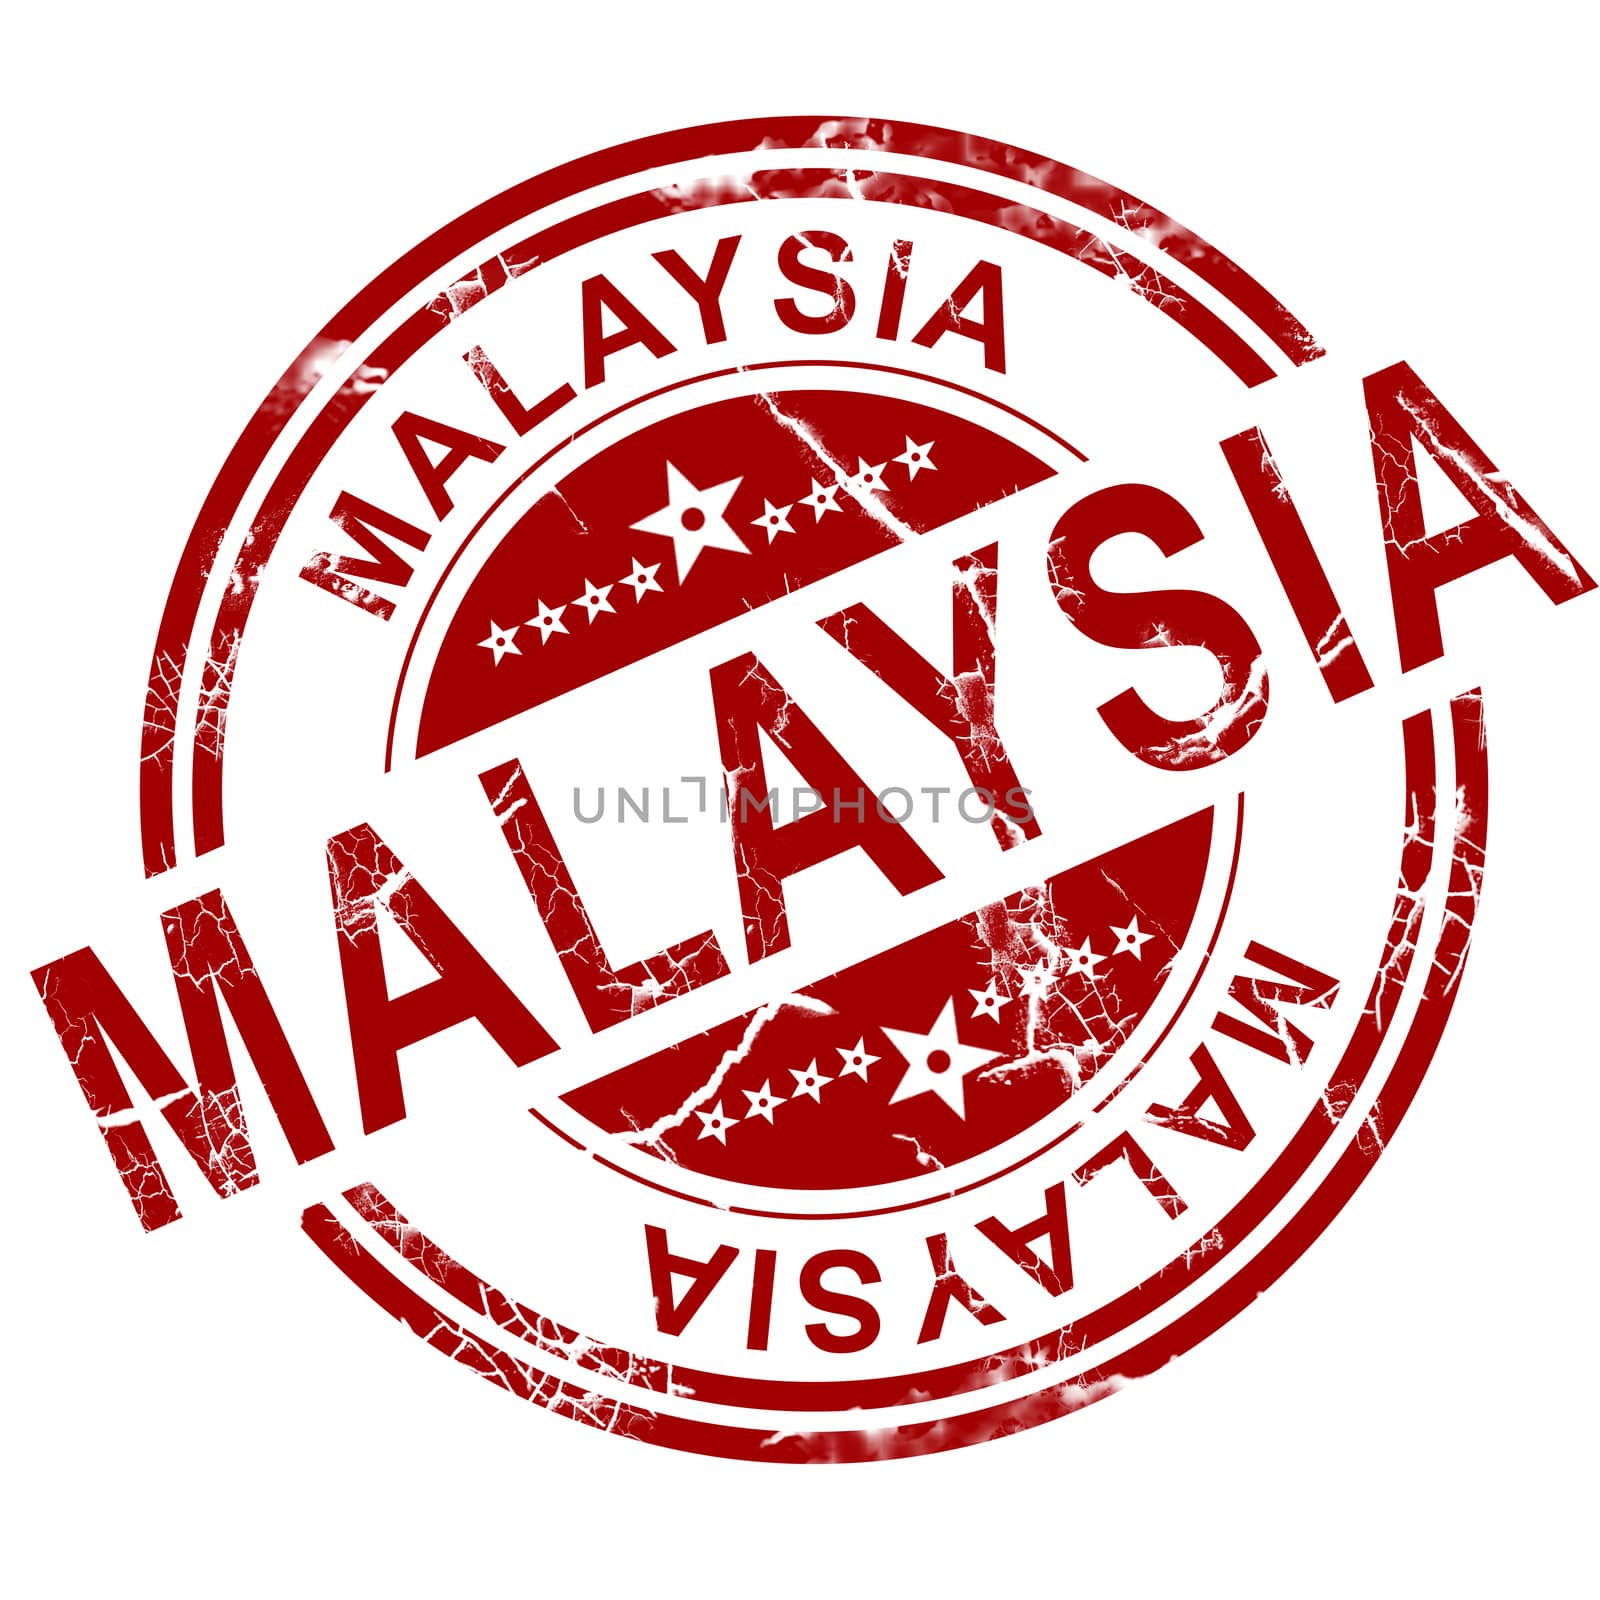 Red Malaysia stamp with white background, 3D rendering